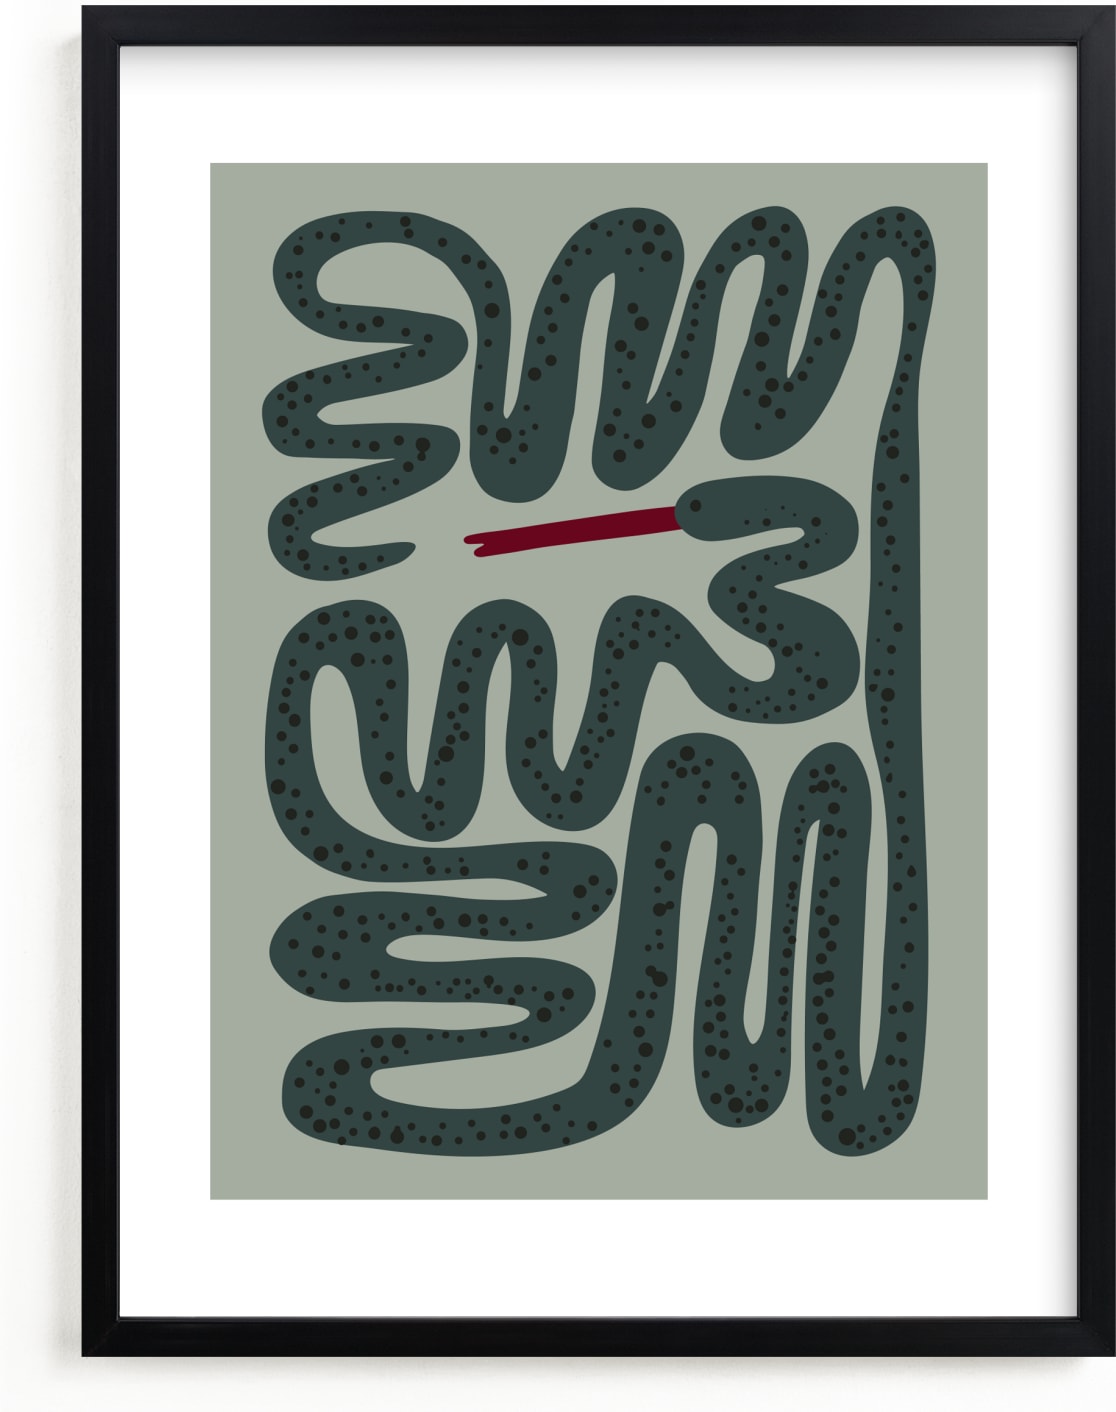 This is a black, green art by Jenna Holcomb called Squiggly Snake.